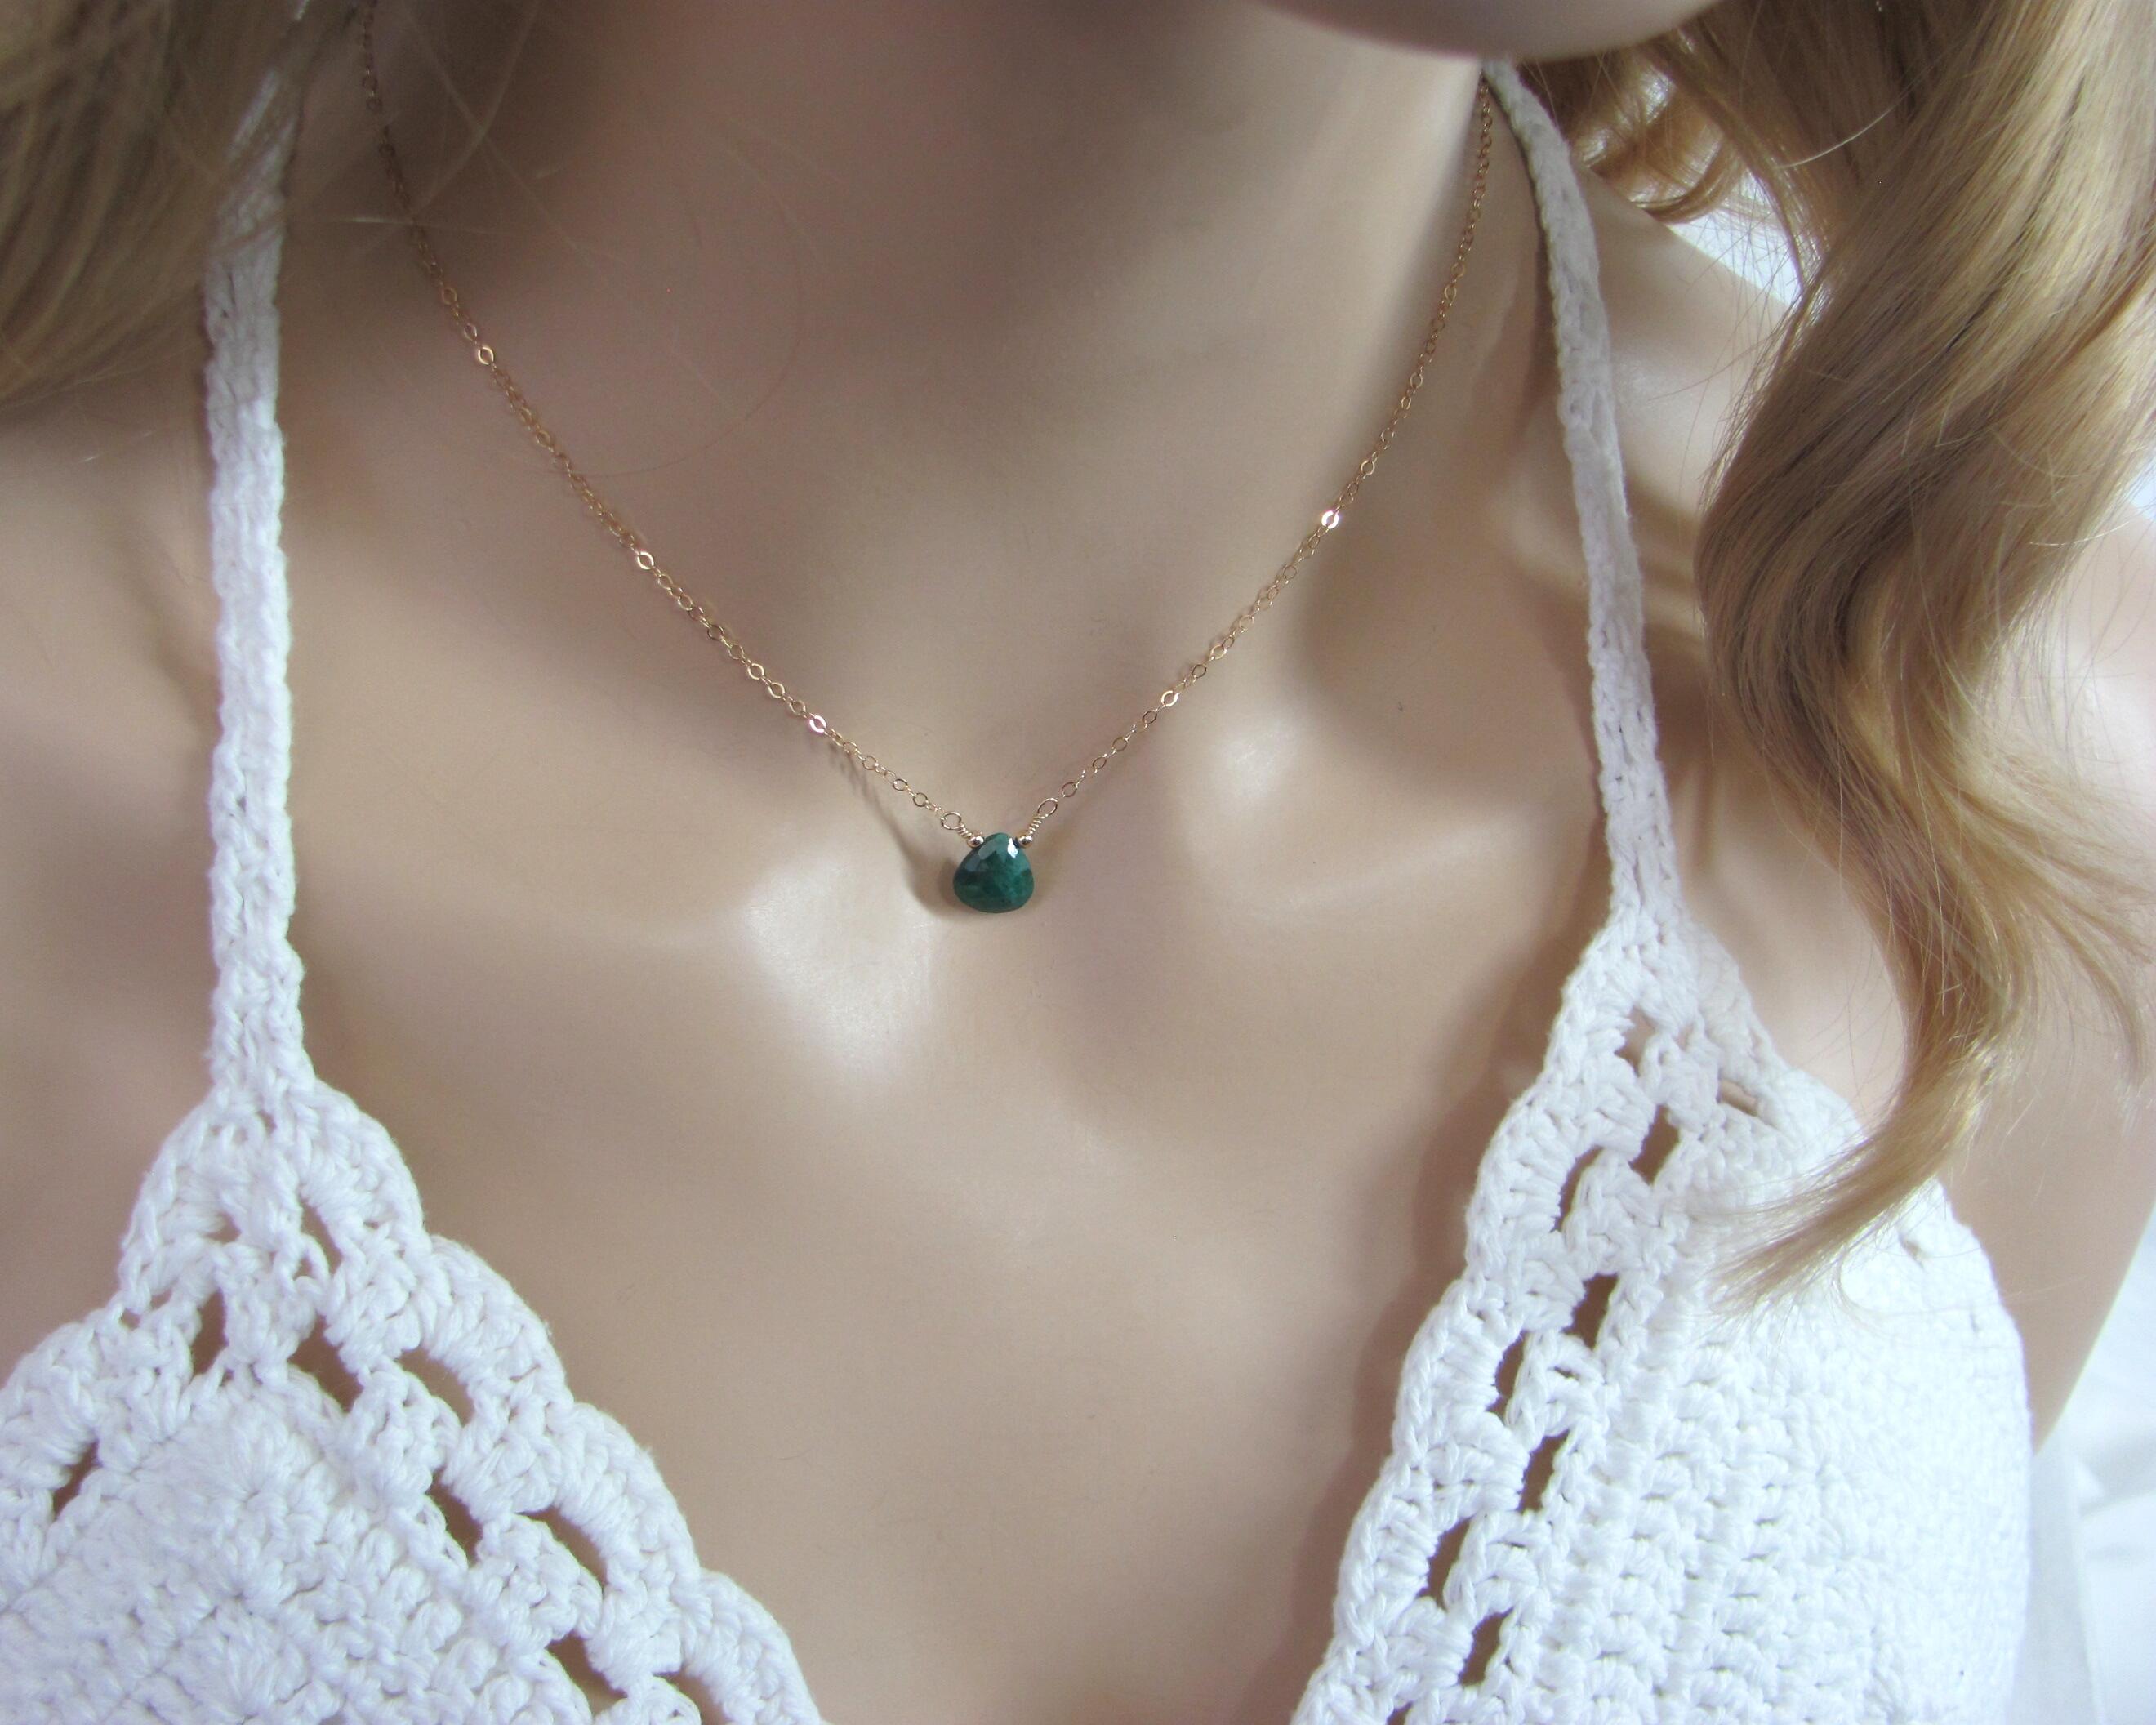 Back Drop Necklace with Genuine Emerald and Opal Gemstones